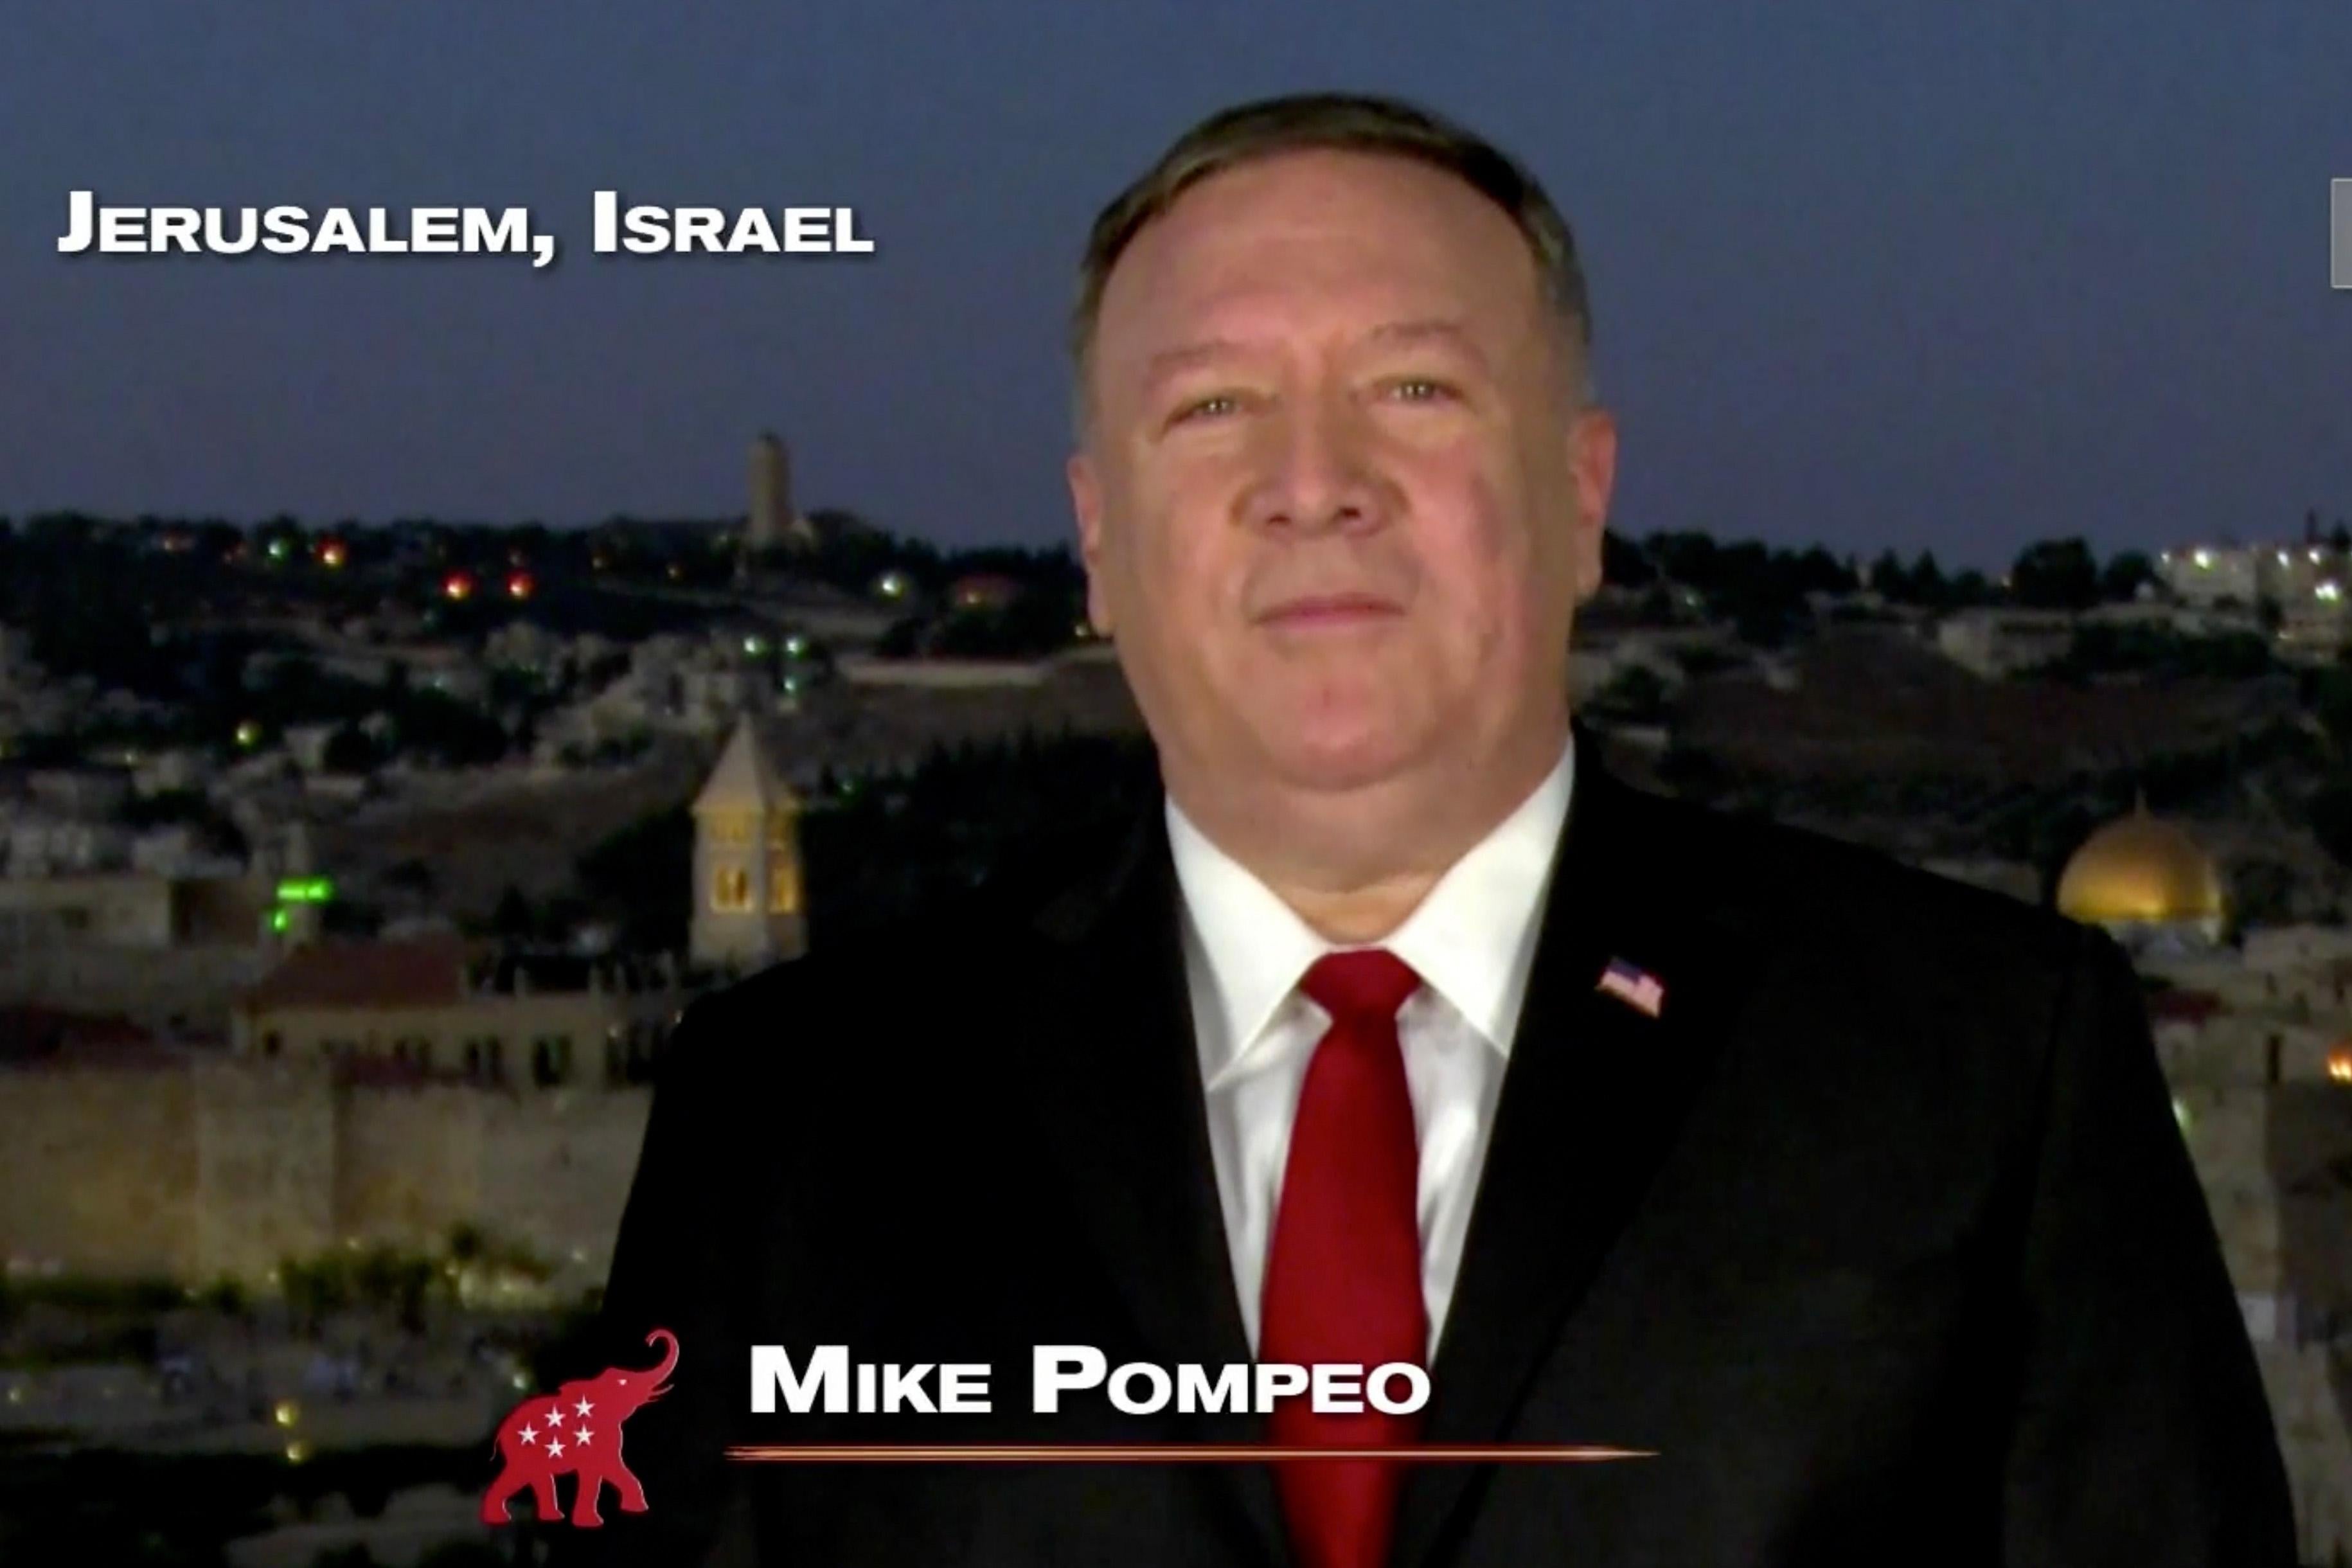 Screenshot of Pompeo speaking from Jerusalem during the 2020 Republican National Convention livestream